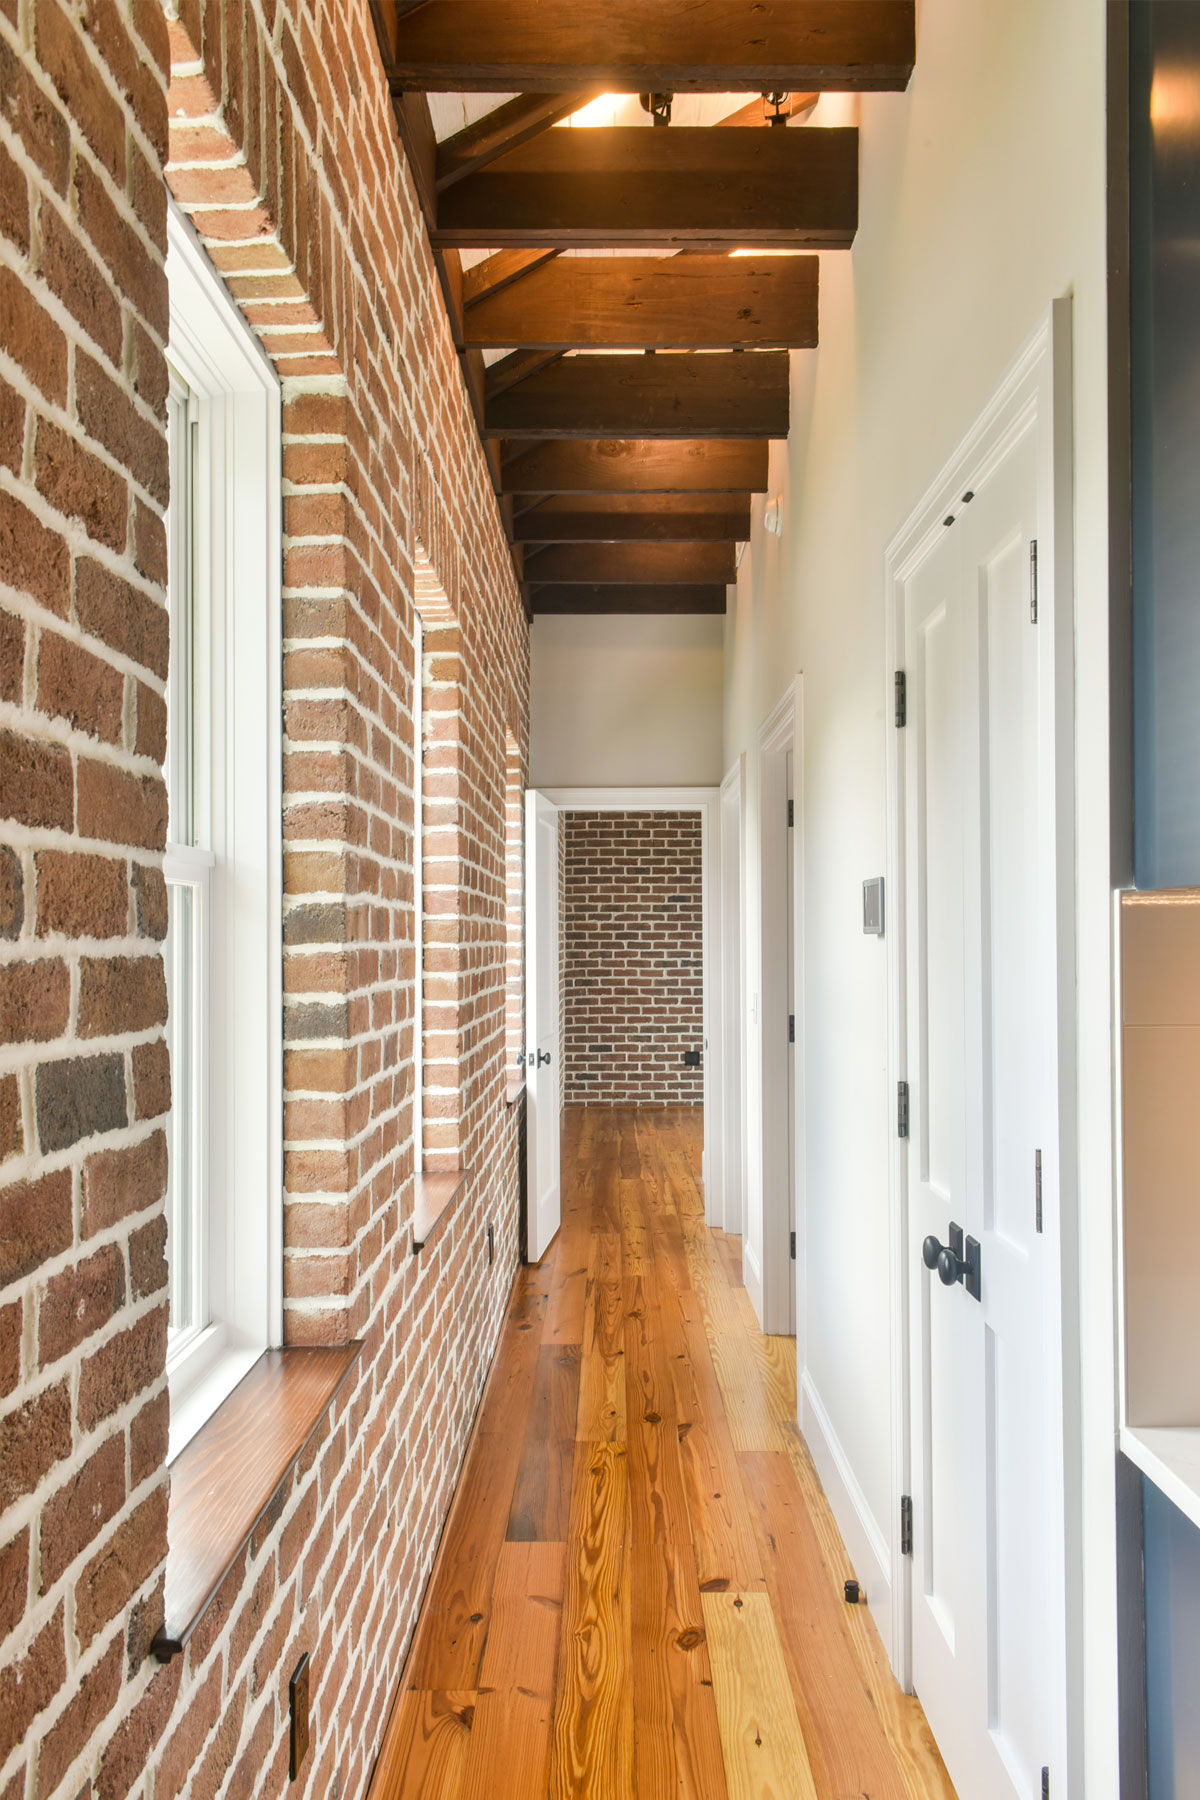 Exposed brick walls and wide plank hardwood floors create coastal charm in this historic home